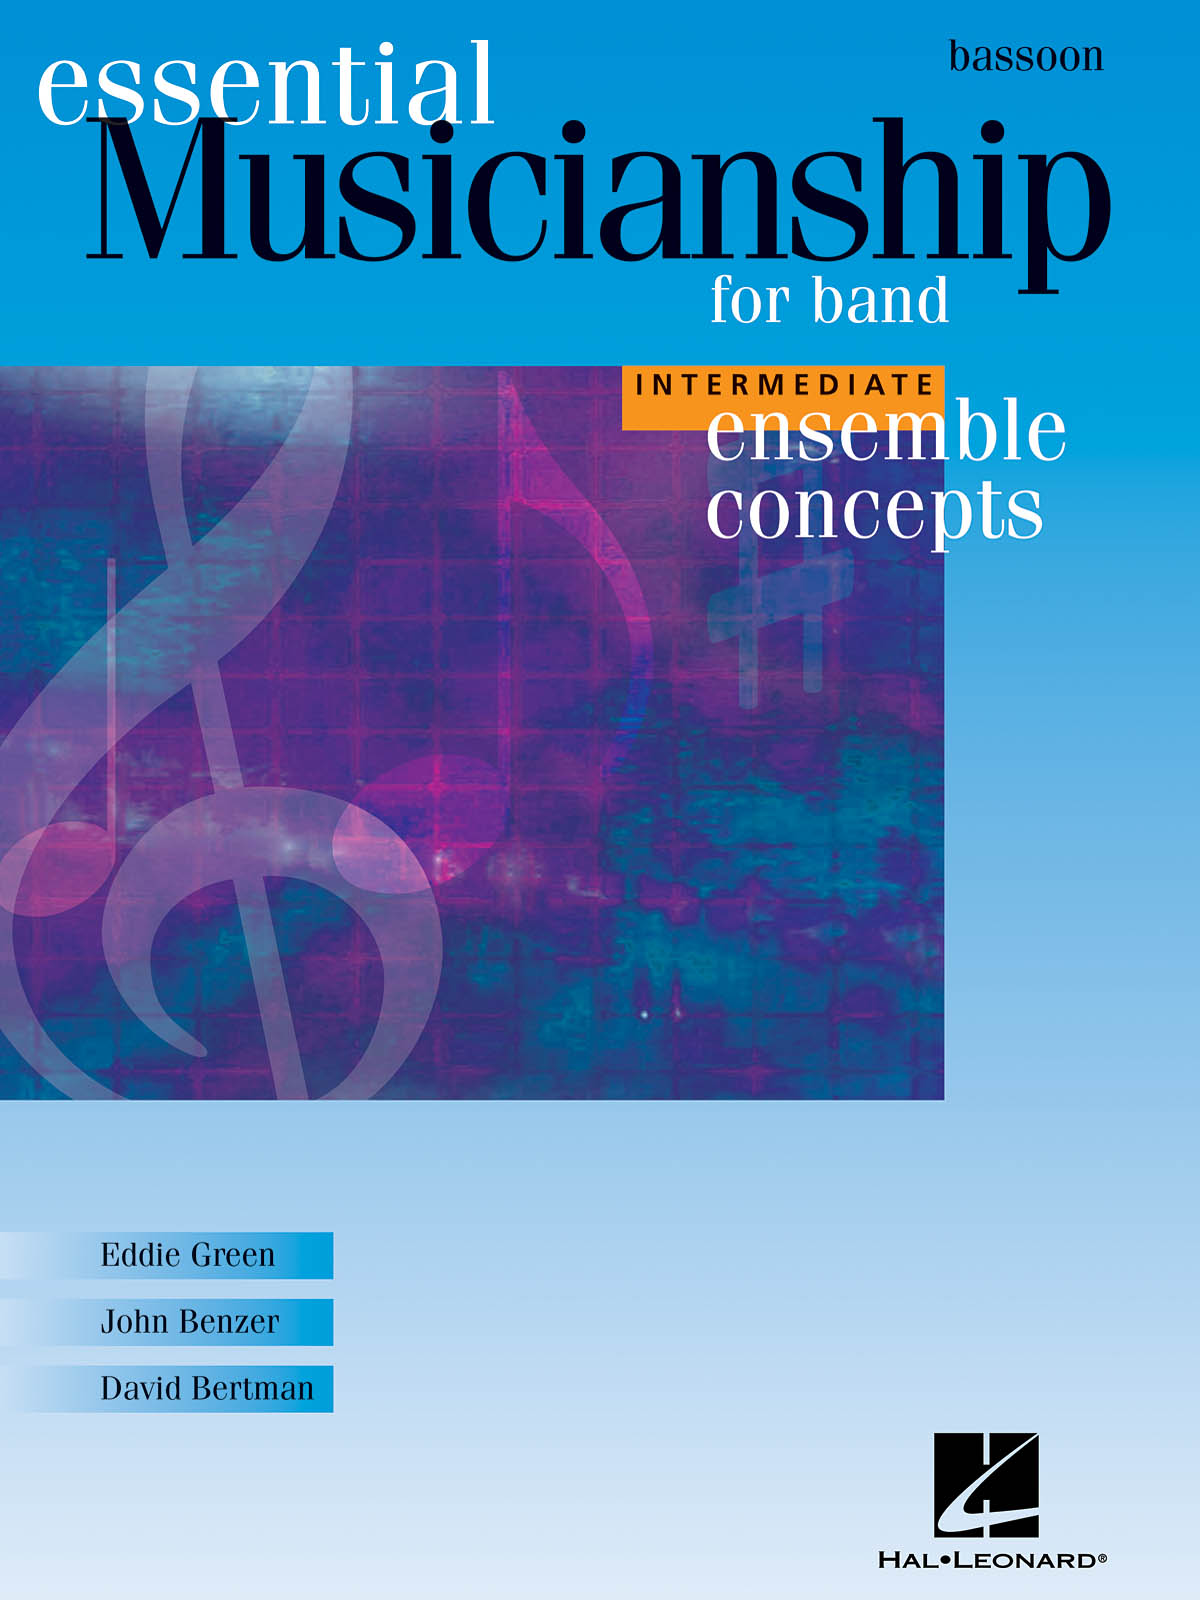 Ensemble Concepts For Band Intermediate Level(Bassoon)